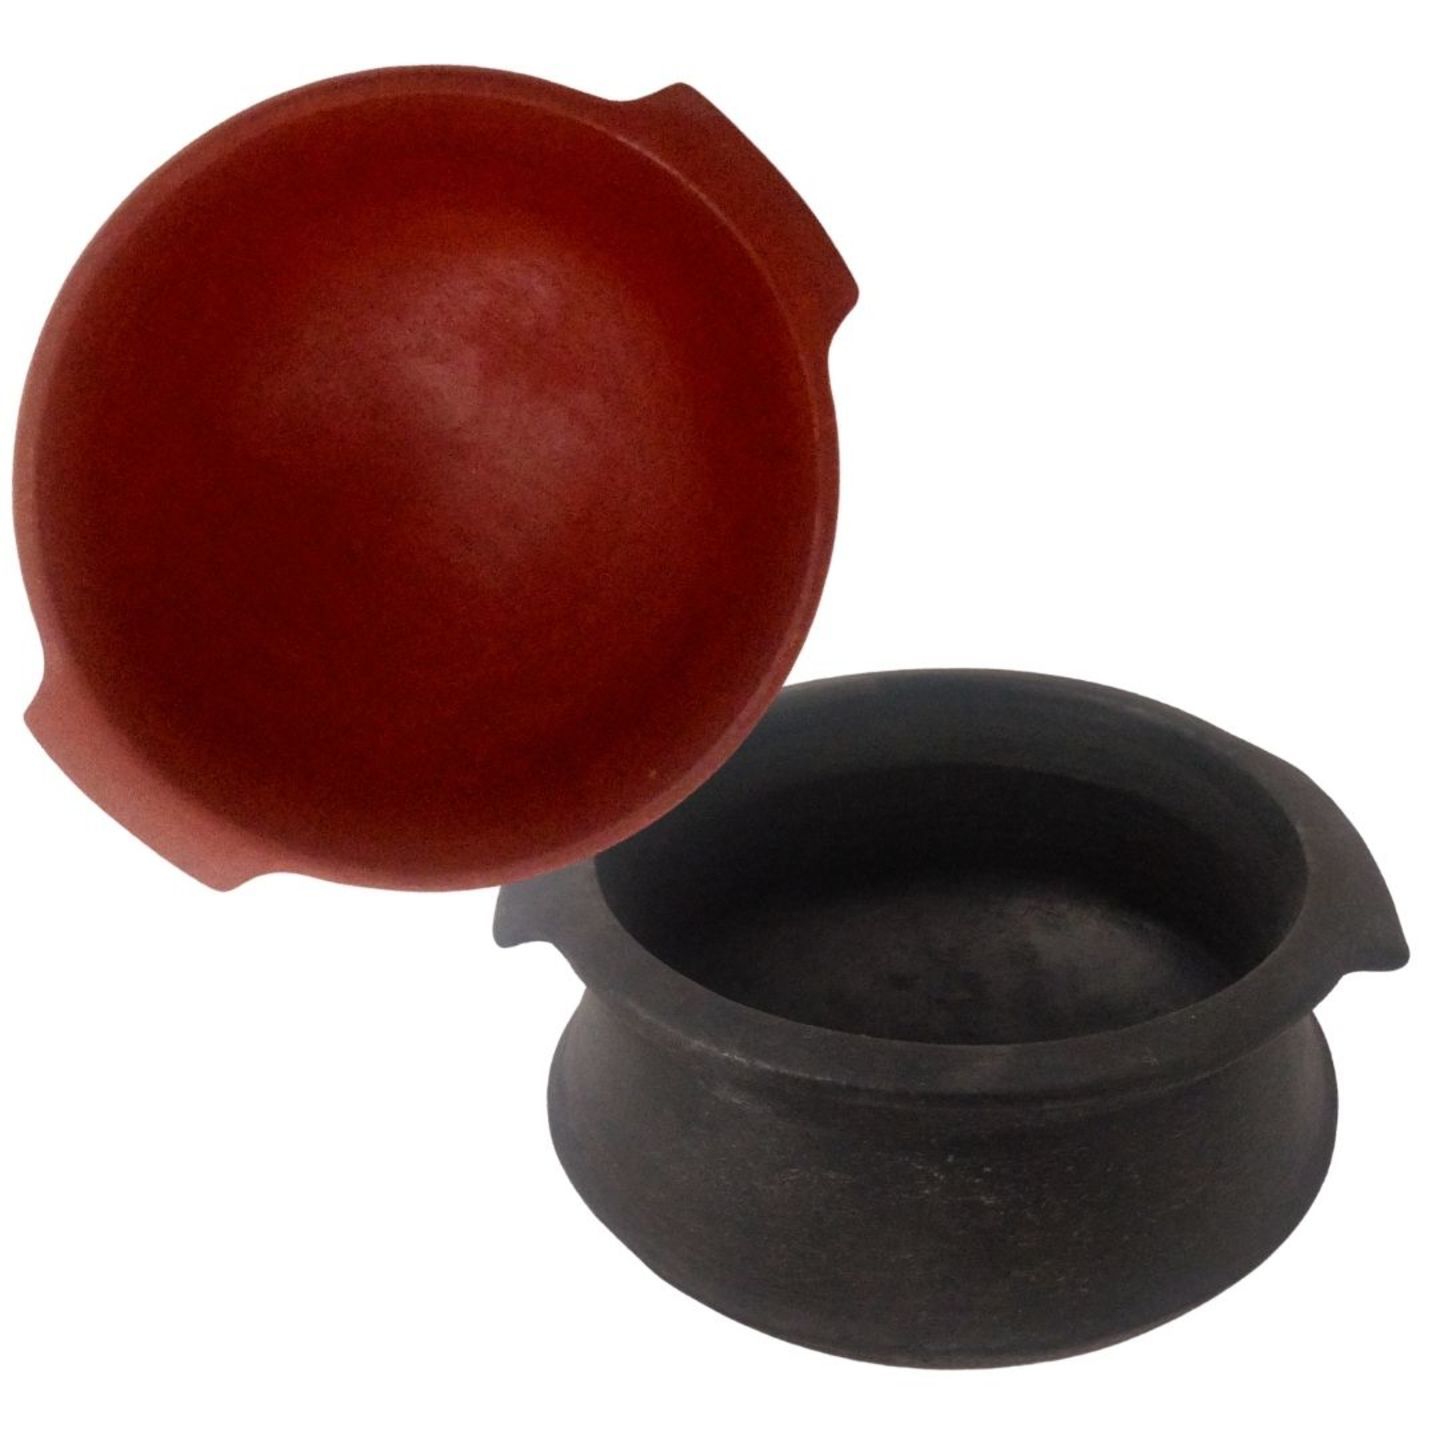 Clay Cookware Combo 